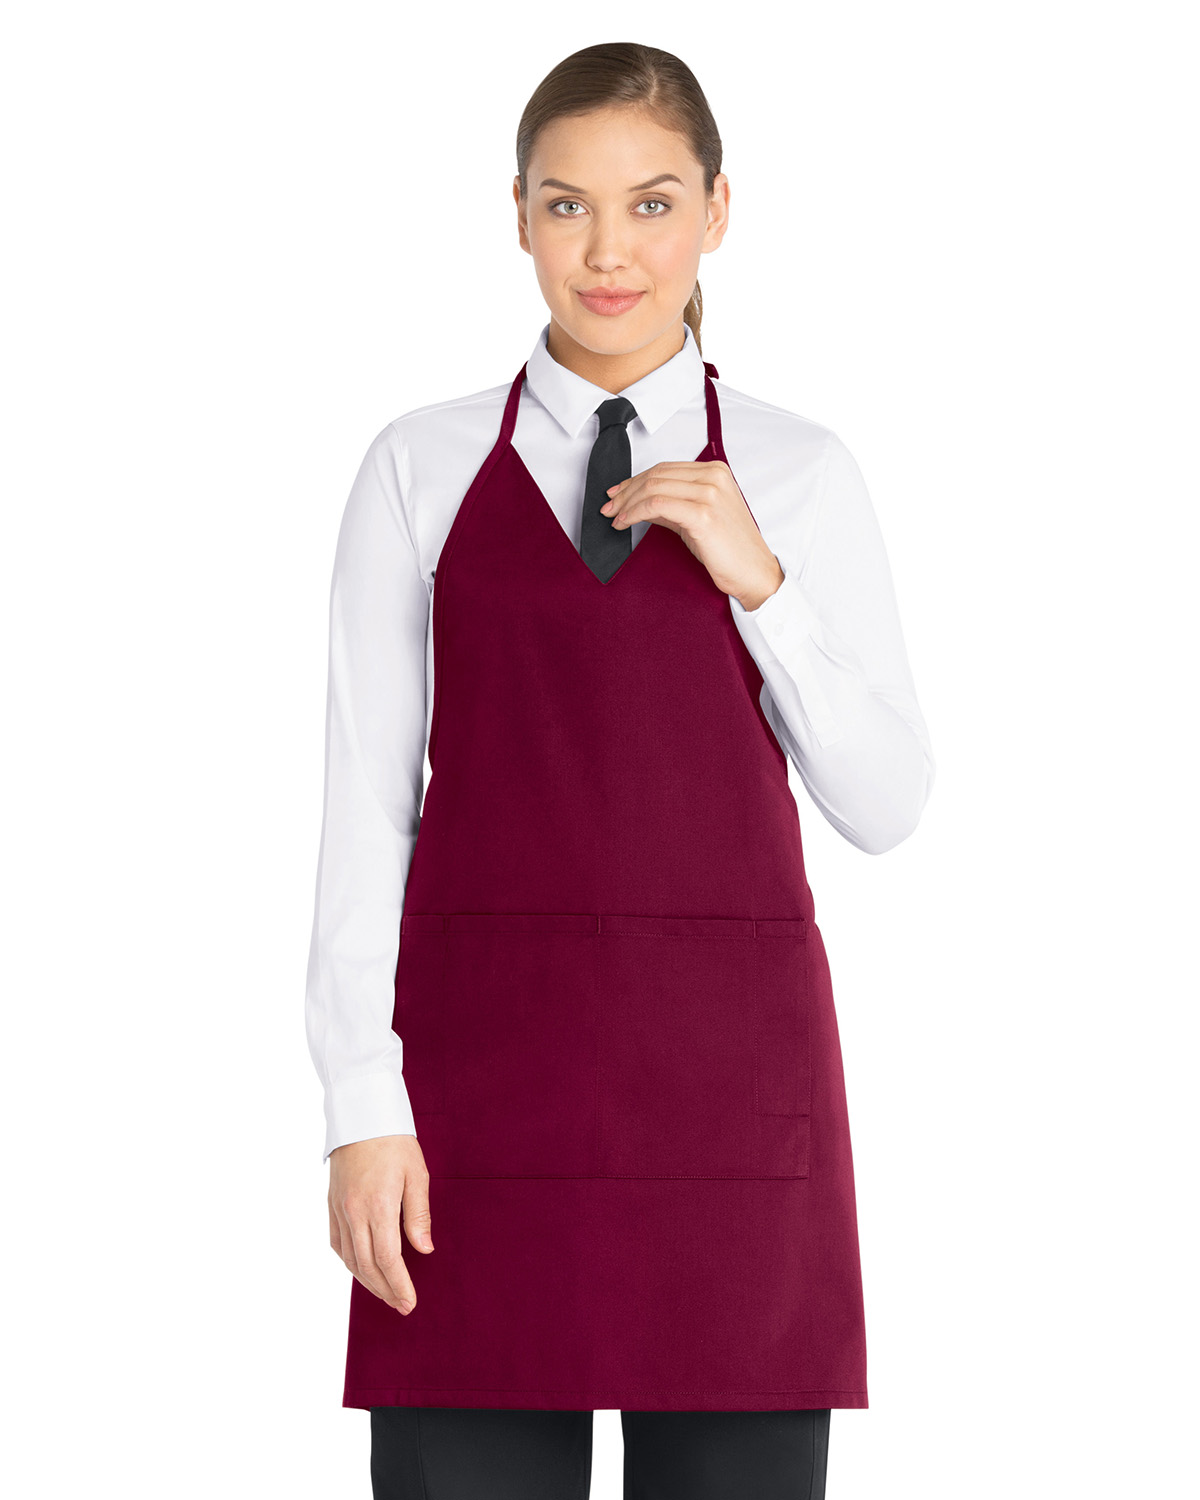 DC53 Dickies Chef V-Neck Tuxedo Apron with Snaps